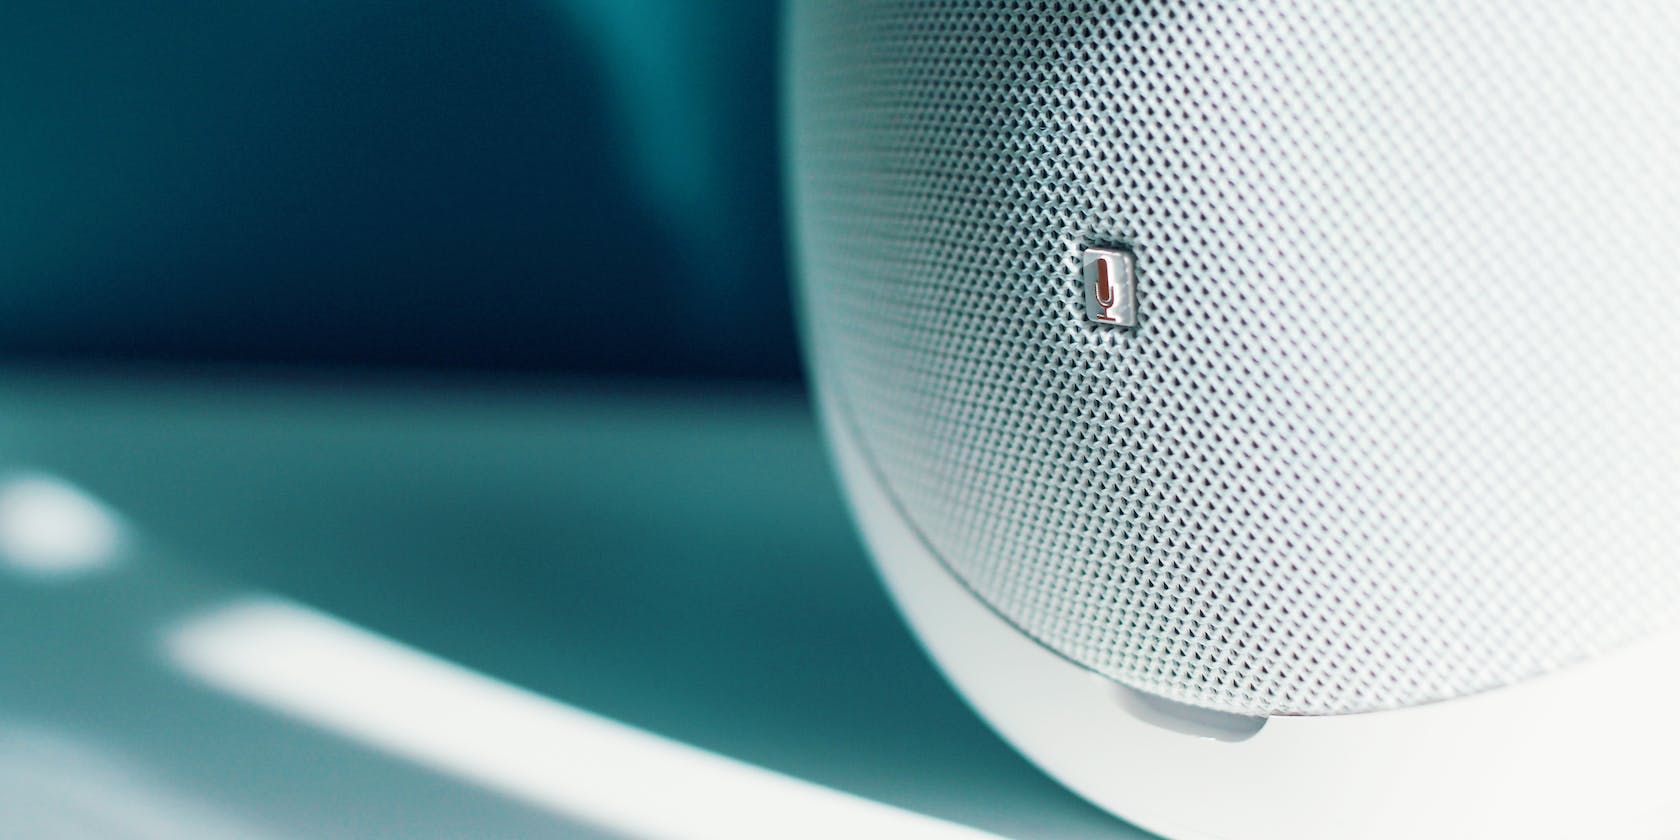 close up photograph of a bluetooth speaker